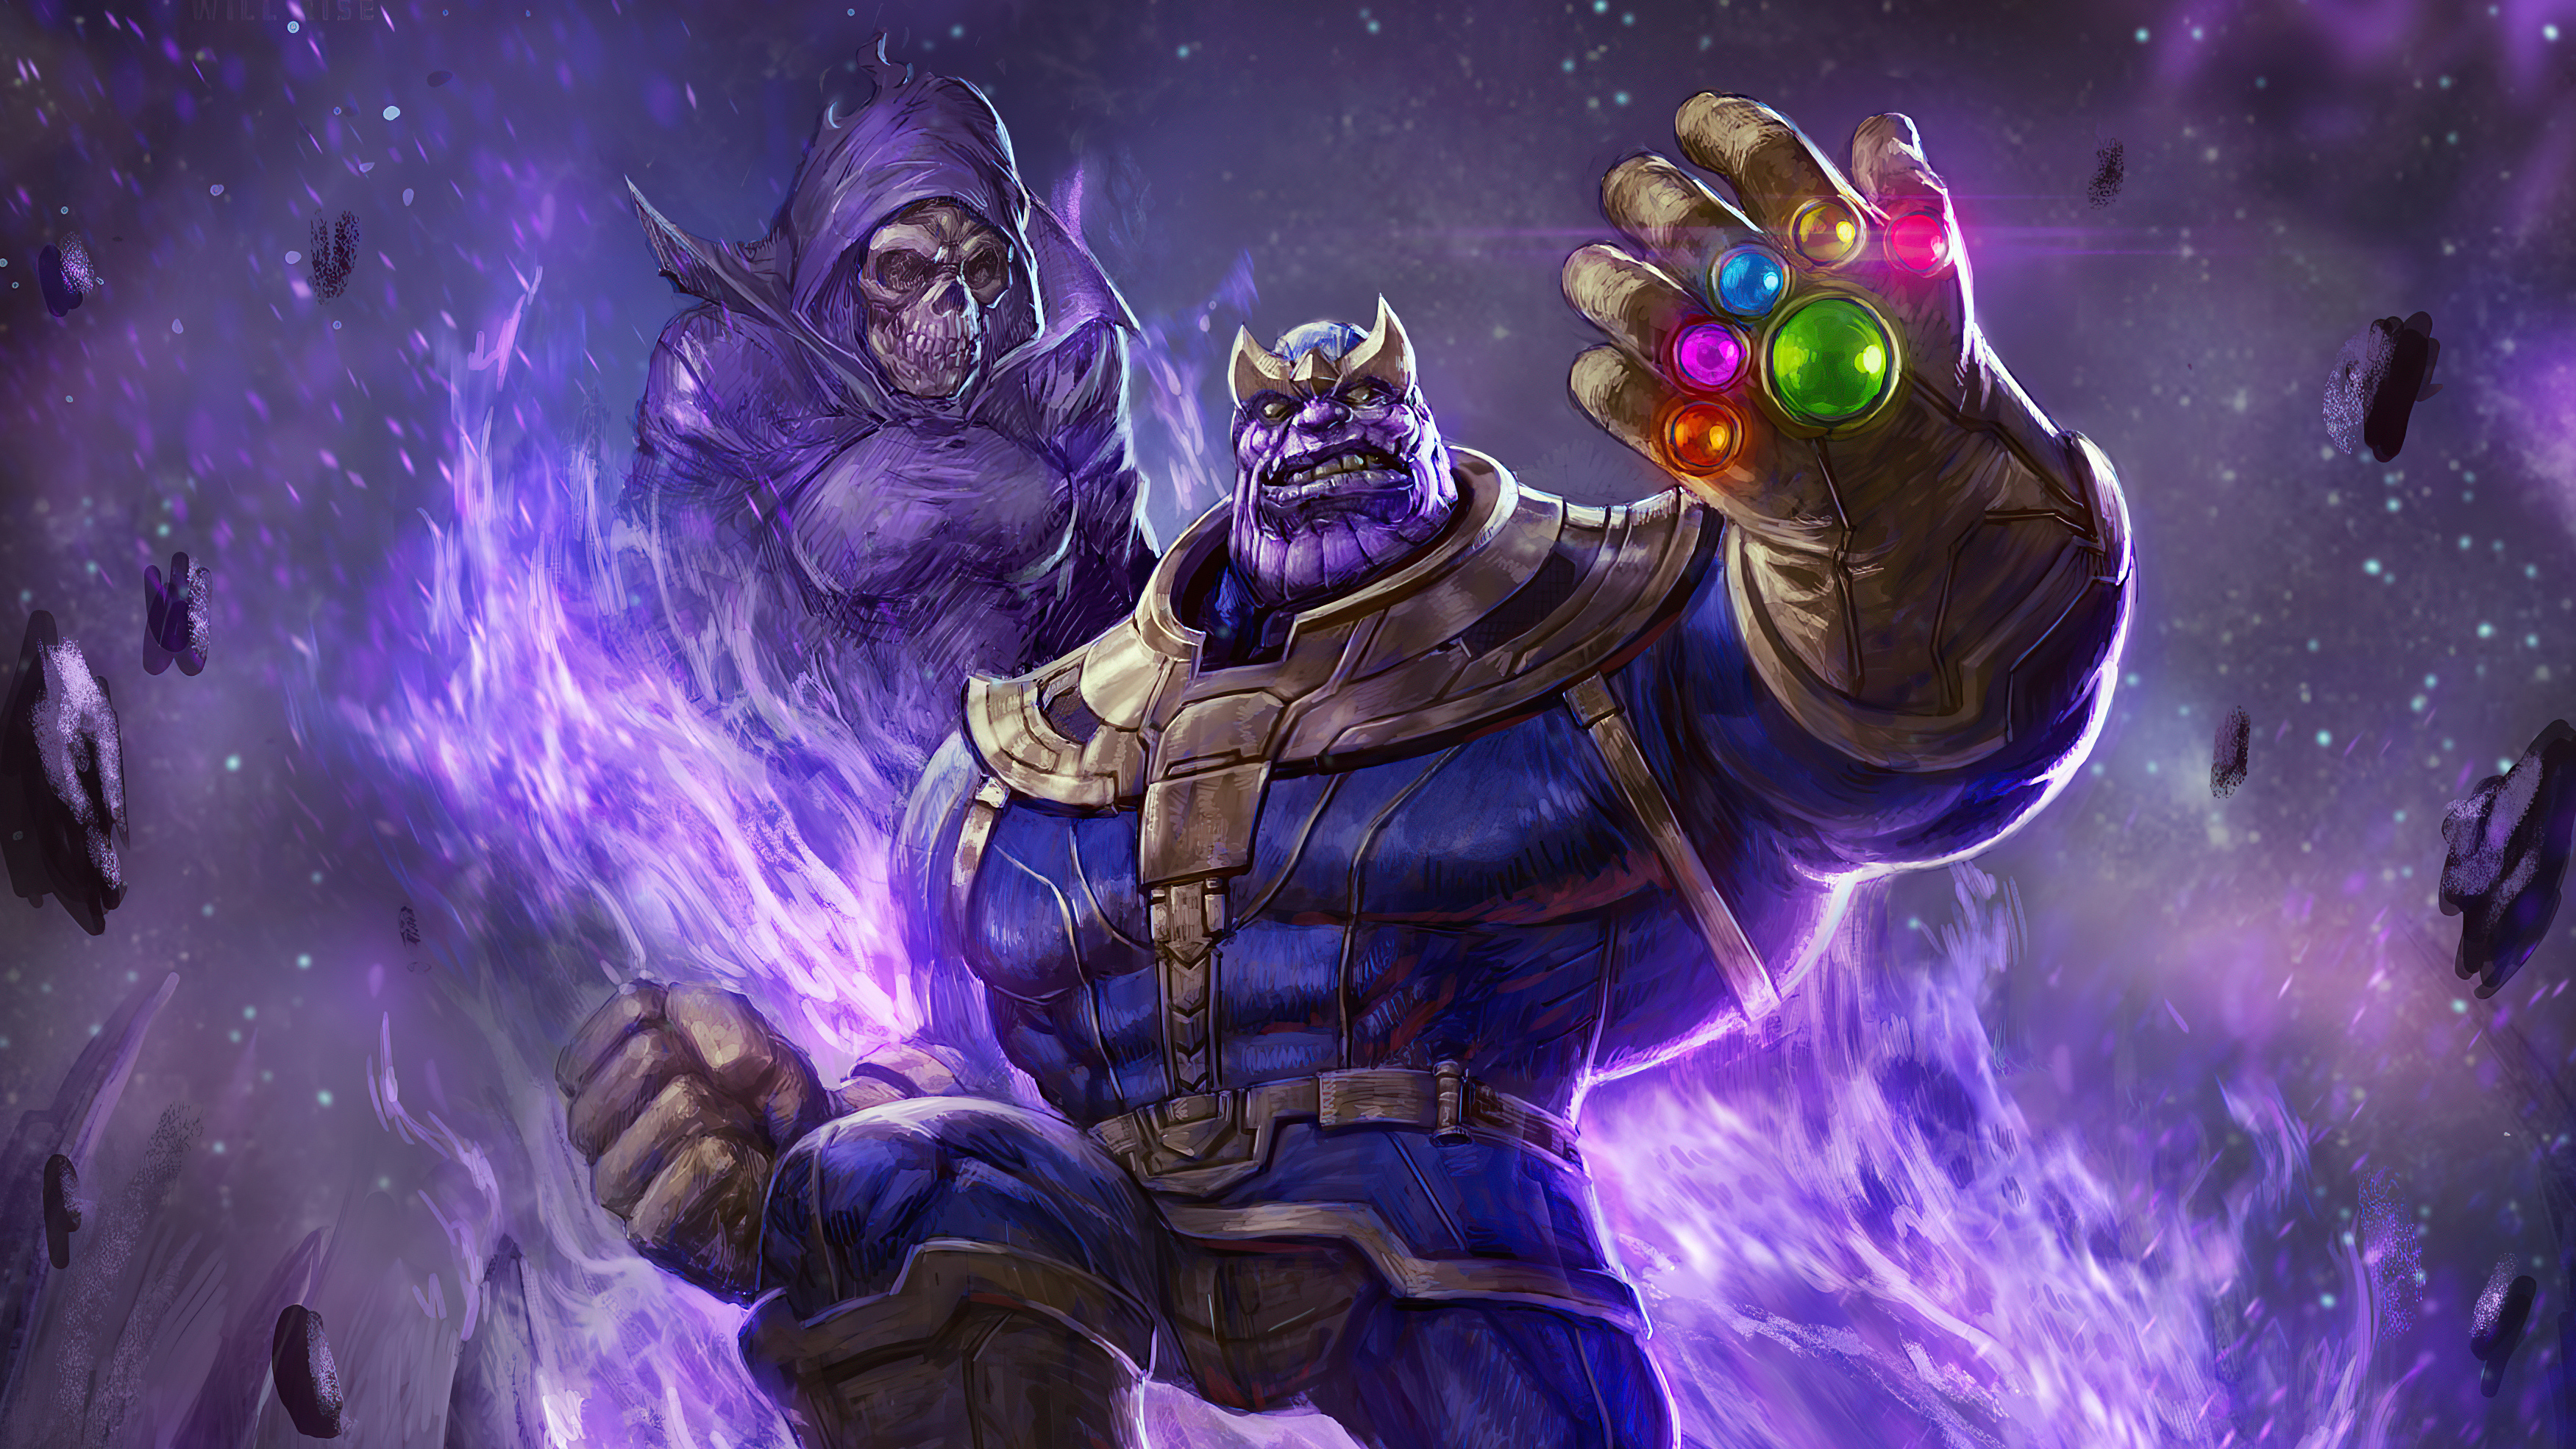 Thanos Infinity Gauntlet Wallpapers | HD Wallpapers | ID #24097